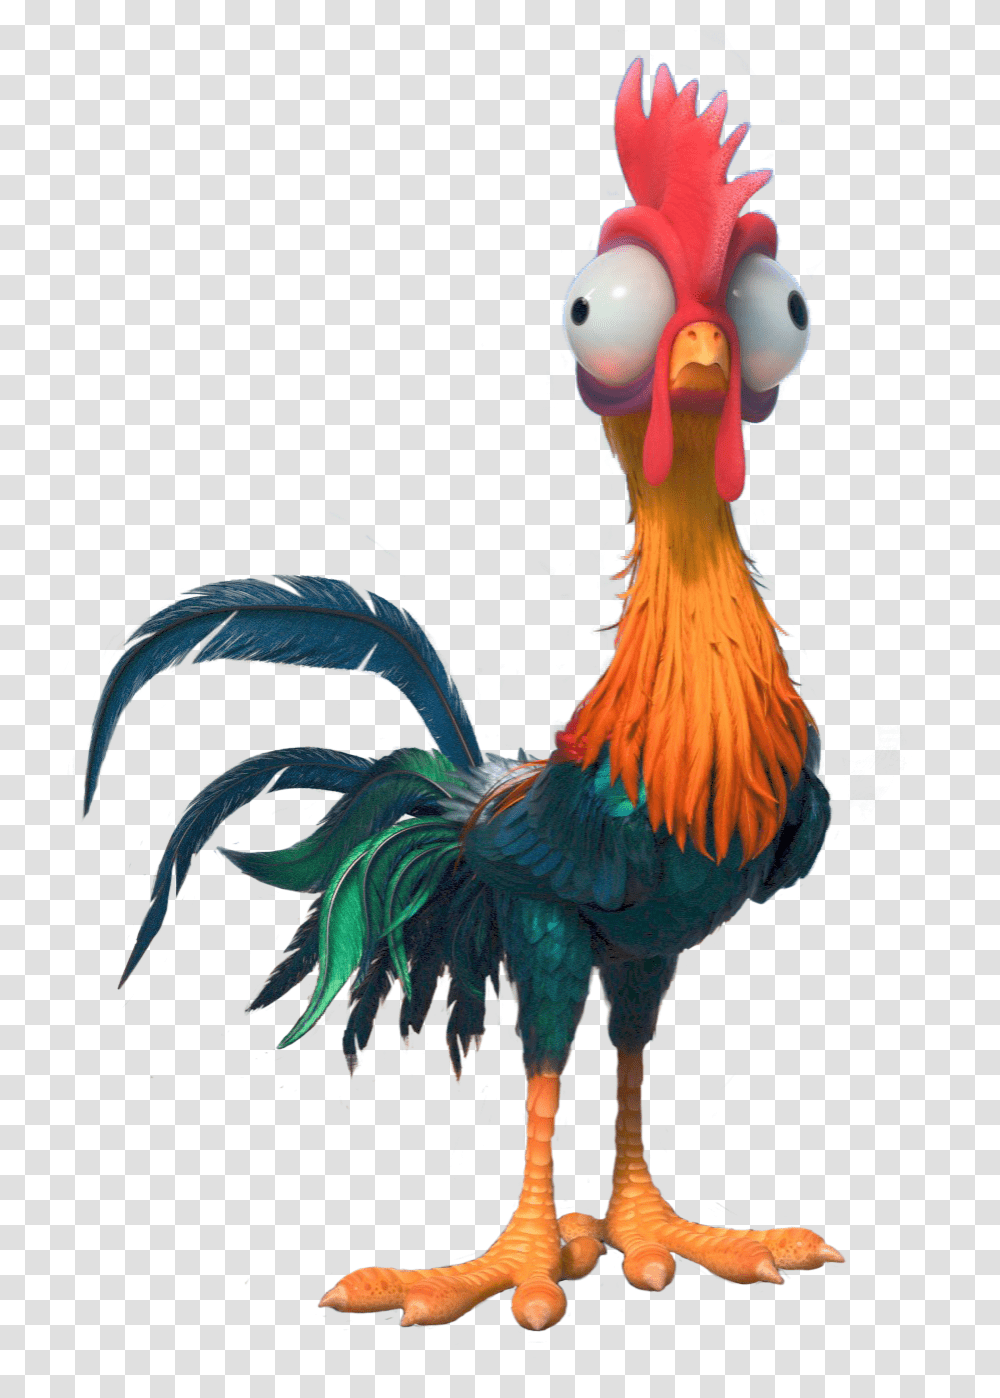 Moana Boat Hei Hei, Animal, Bird, Fowl, Poultry Transparent Png